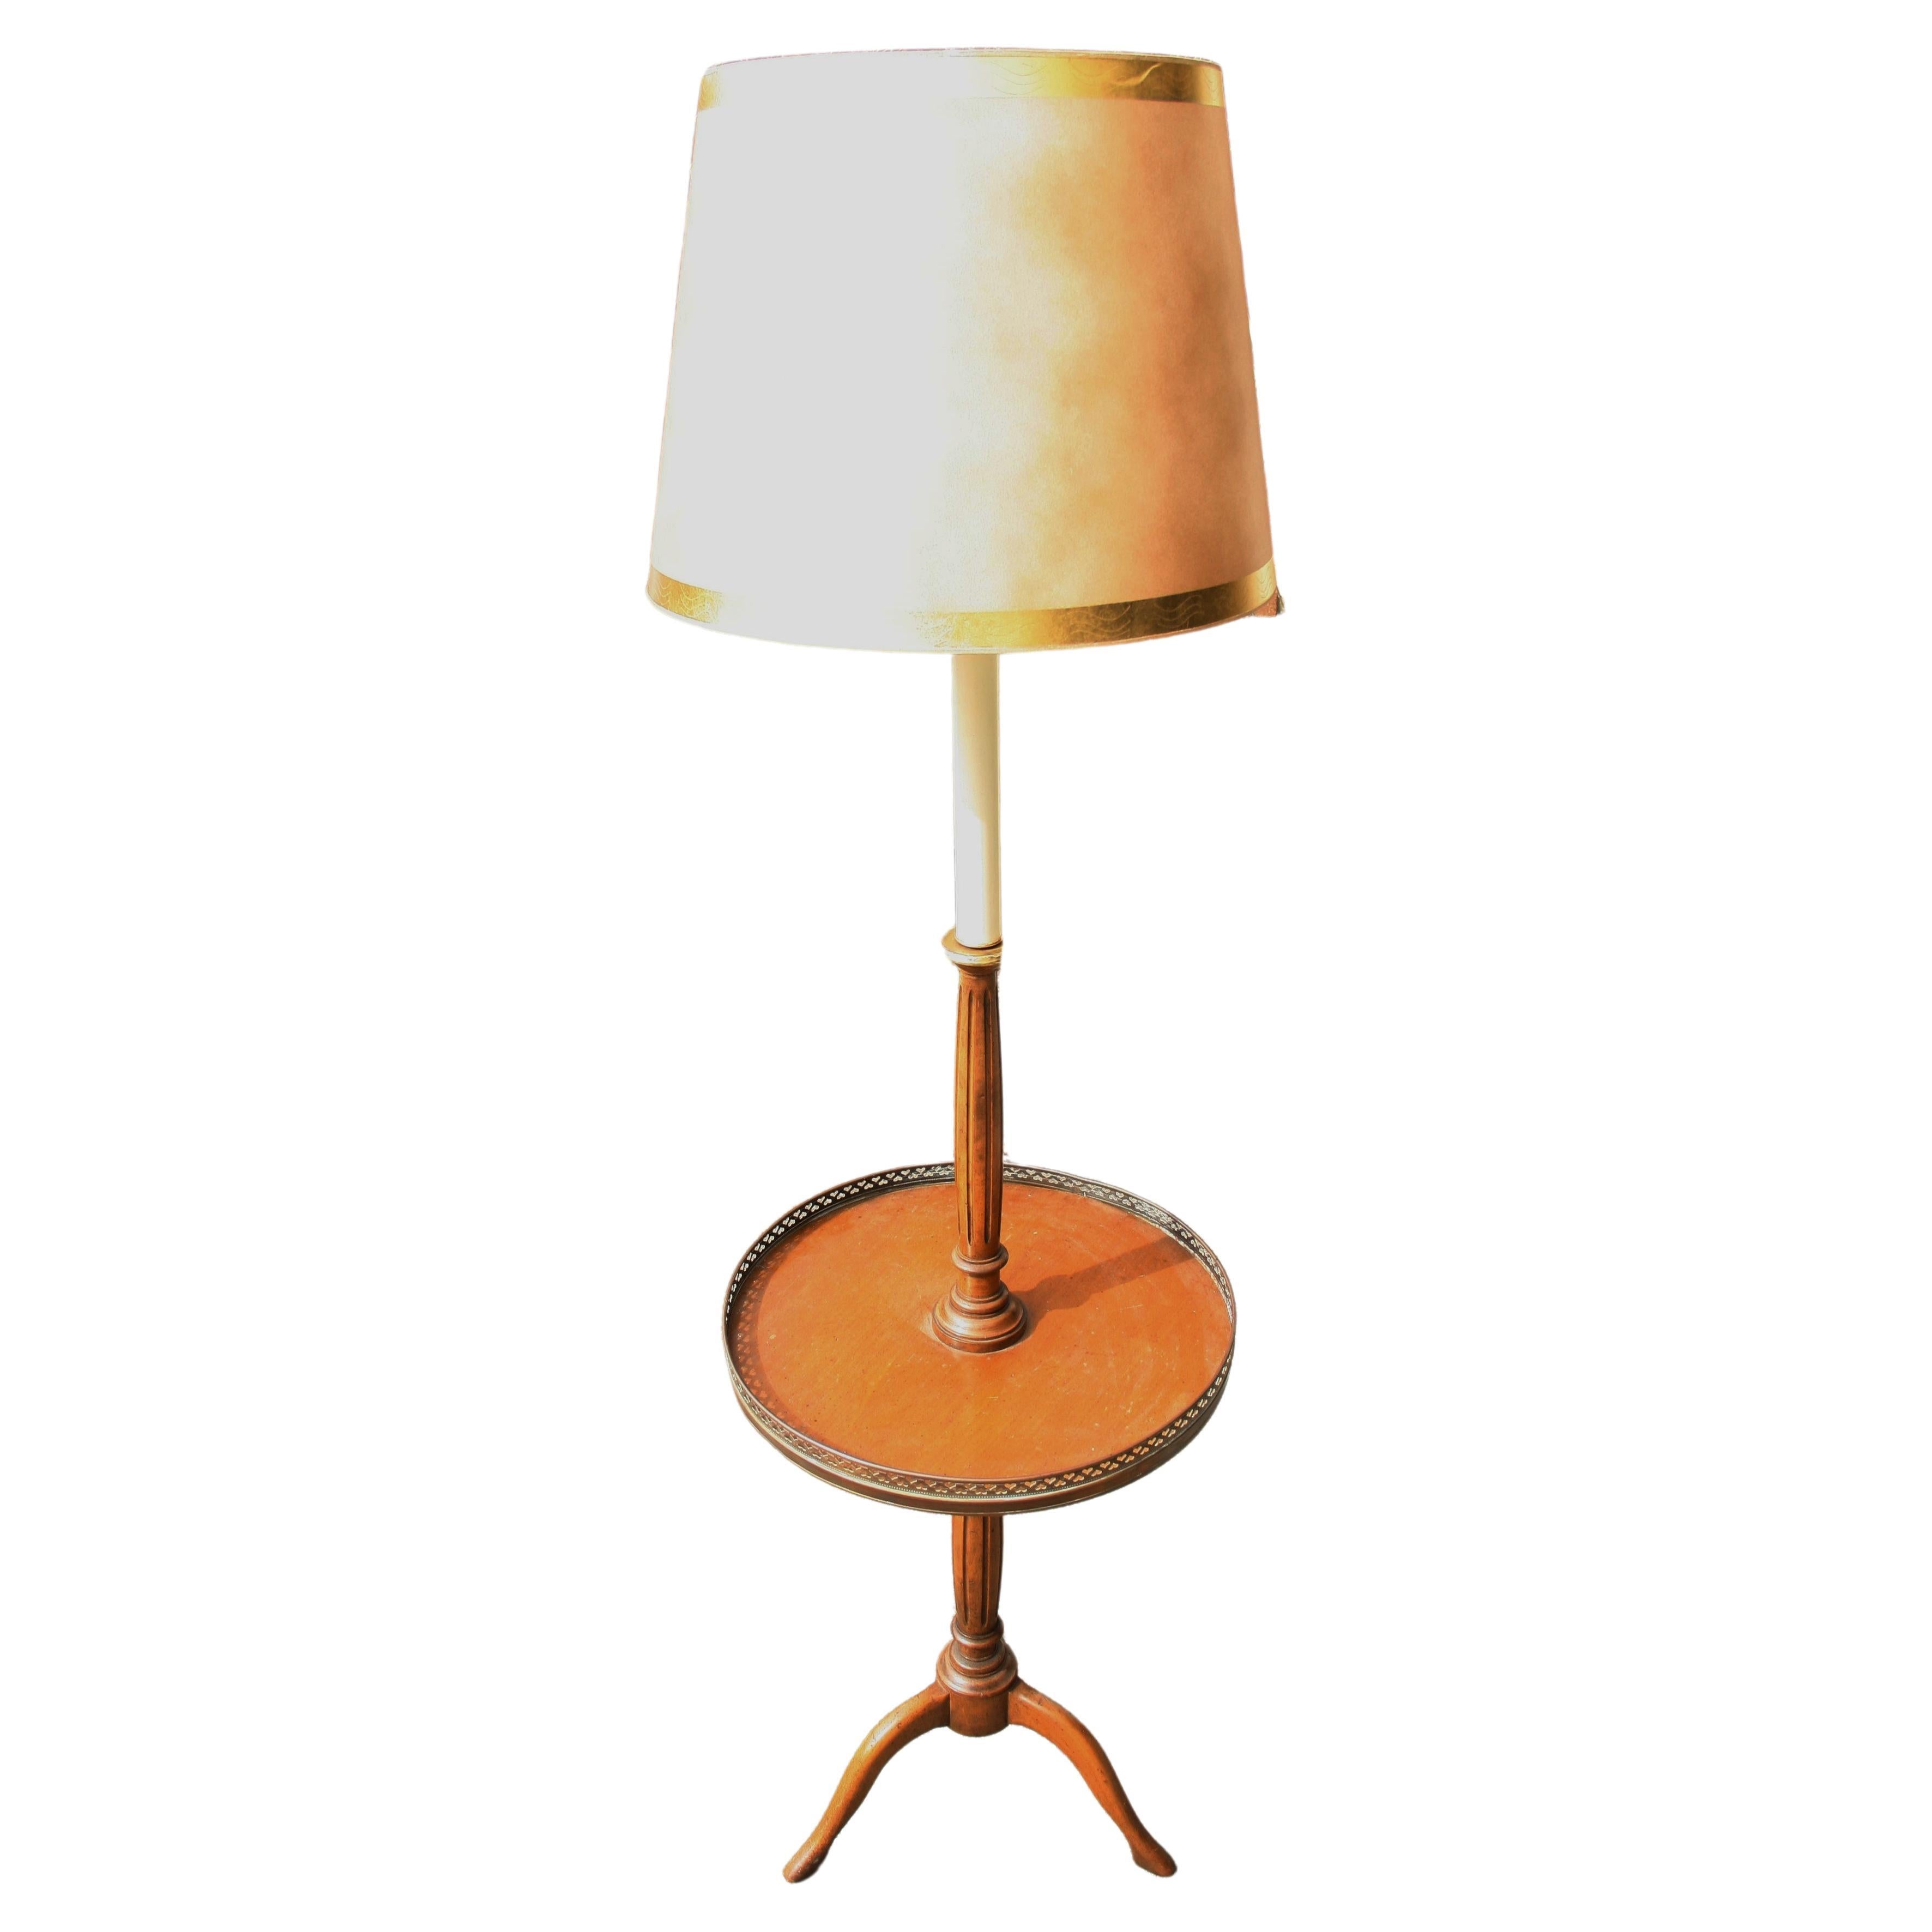 Tripod Floor Lamp with Integrated Table with Brass rail